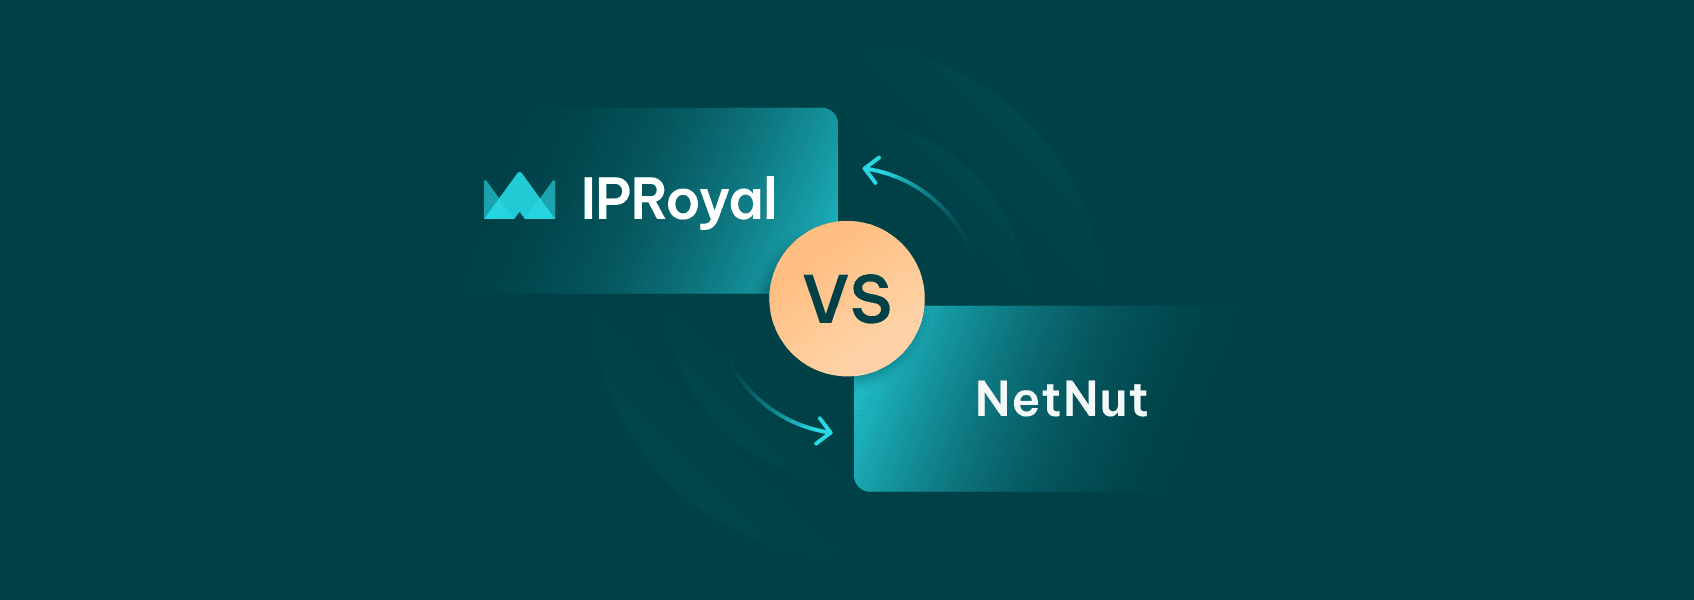 IPRoyal vs. NetNut - An In-depth Feature Comparison